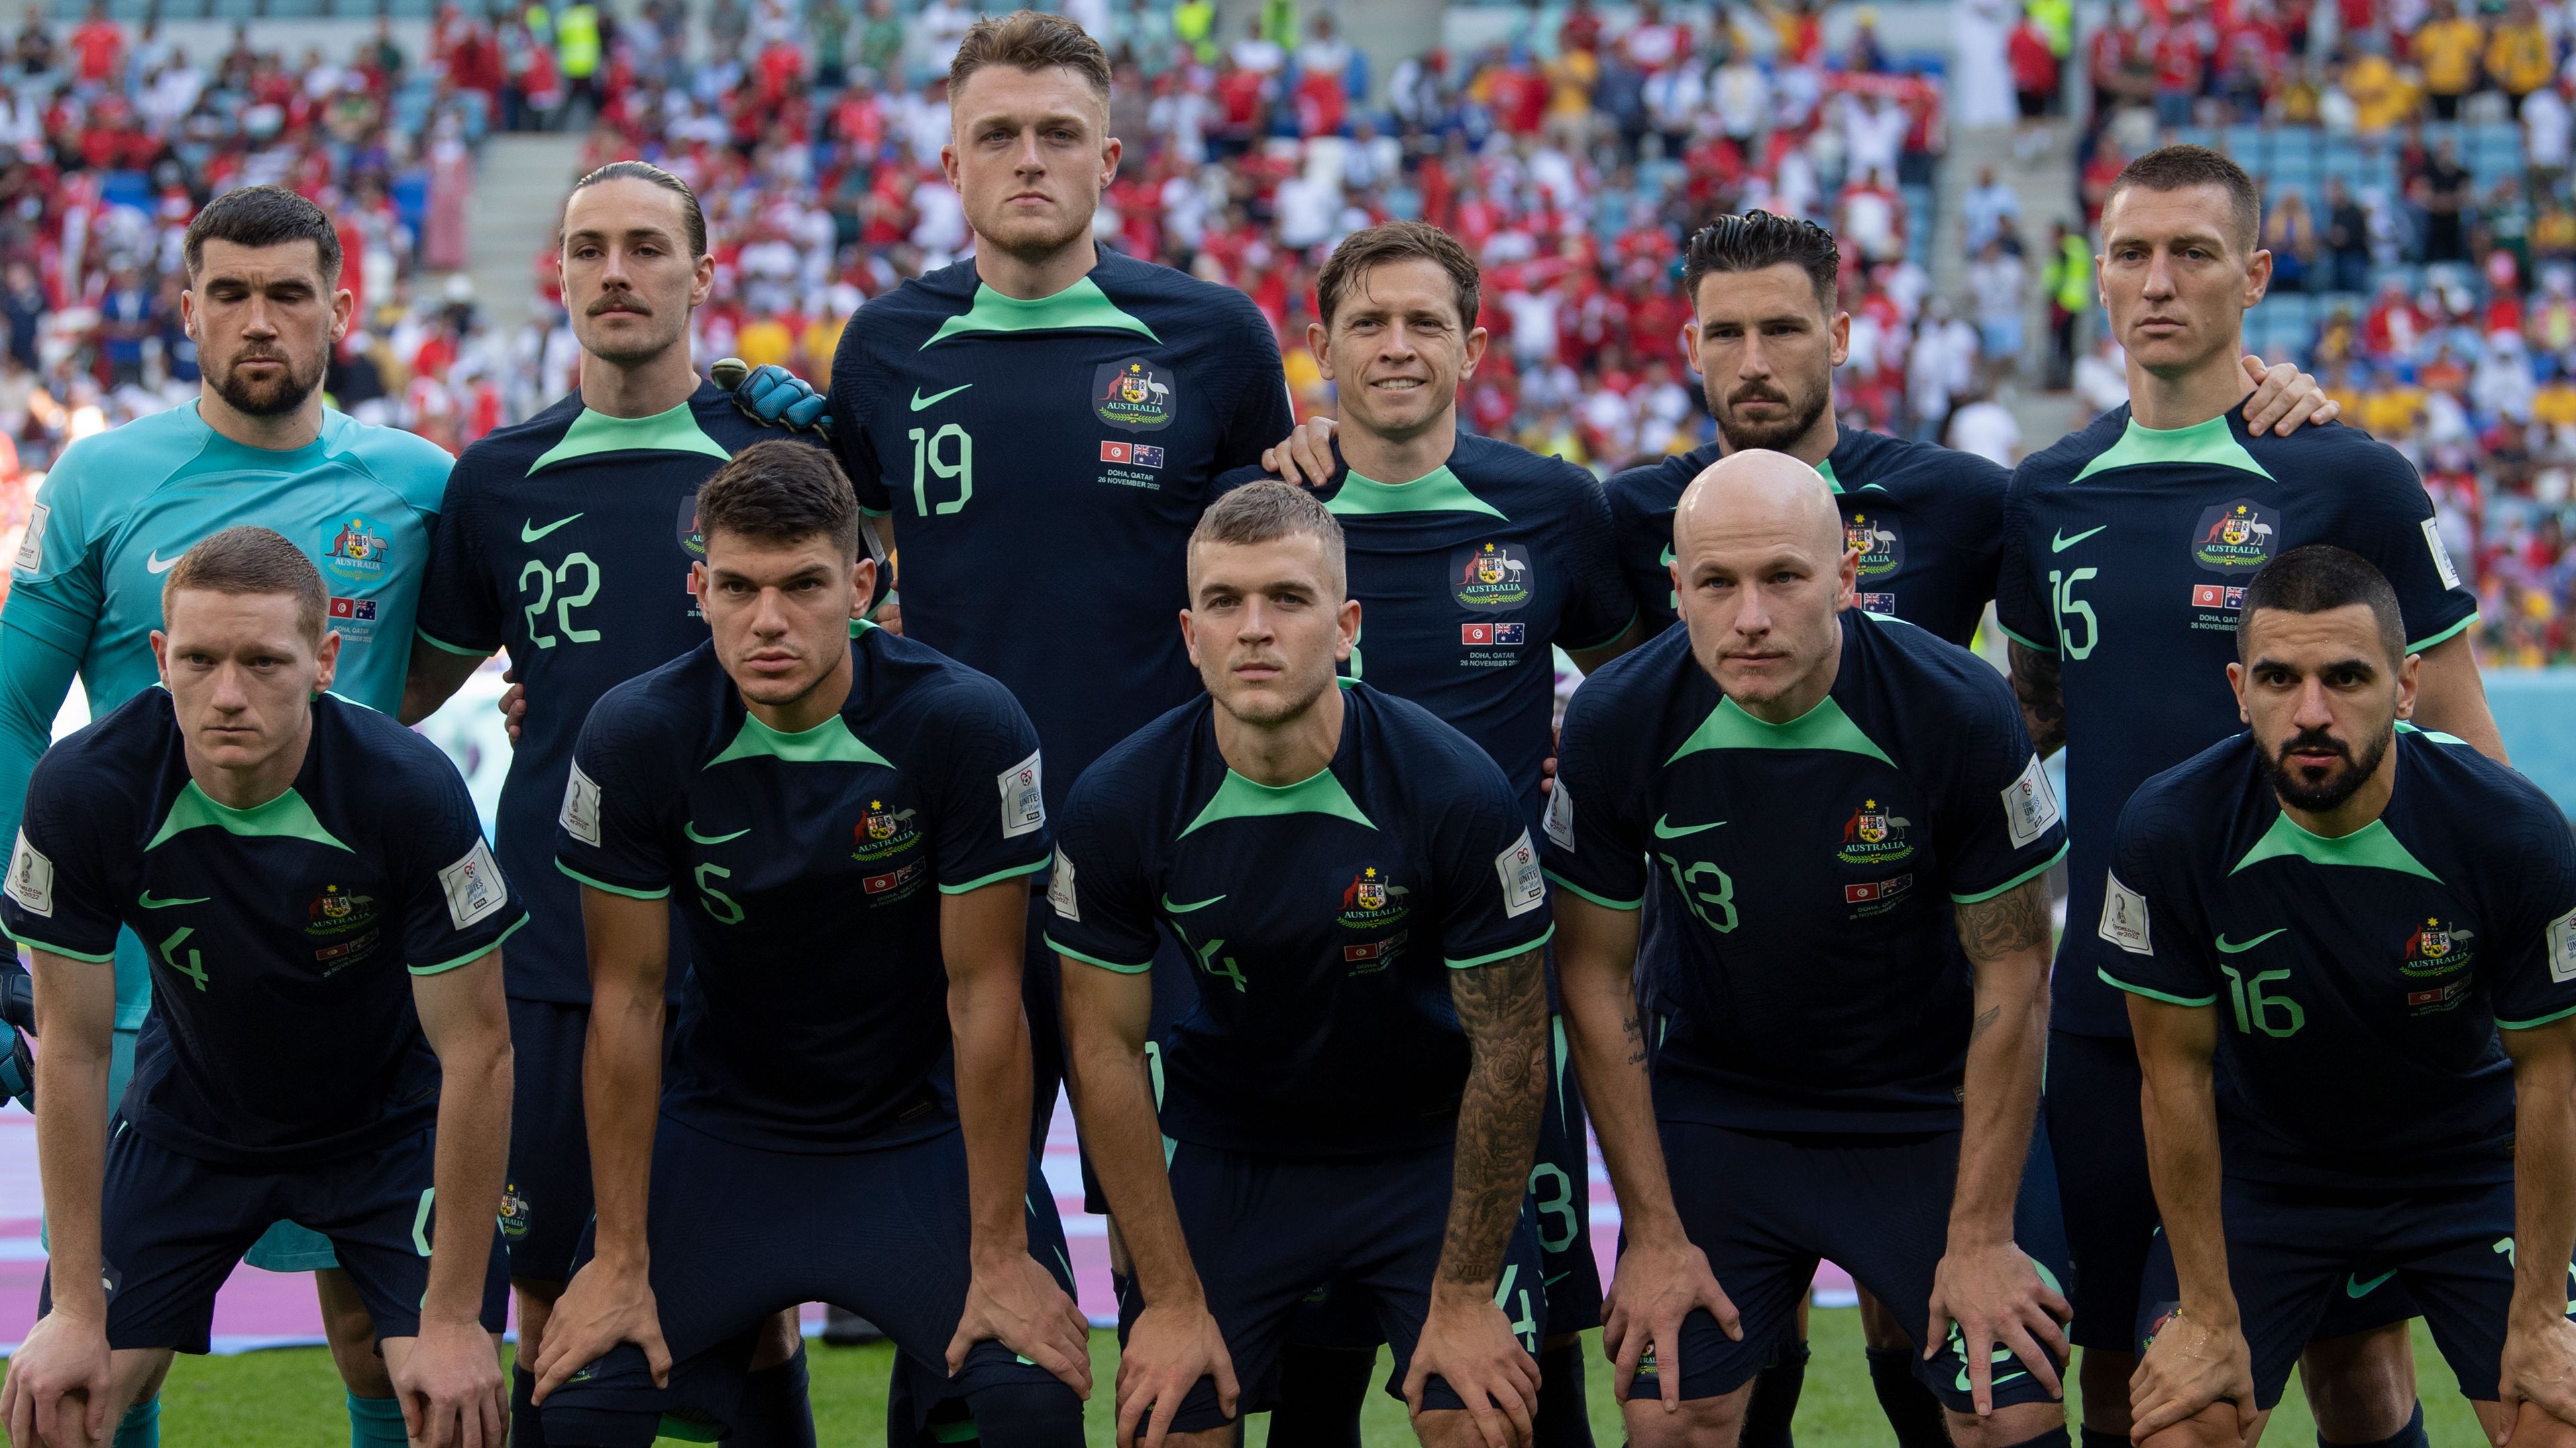 The Soceroos team photo before their 2022 World Cup clash with Tunisia. (back row from l-r) Matthew Ryan, Jackson Irvine, Harry Souttar, Craig Goodwin, Matthew Leckie, Mitchell Duke. (front row from l-r) Kye Rowles, Fran Karacic, Riley McGree, Aaron Mooy and Aziz Behich.